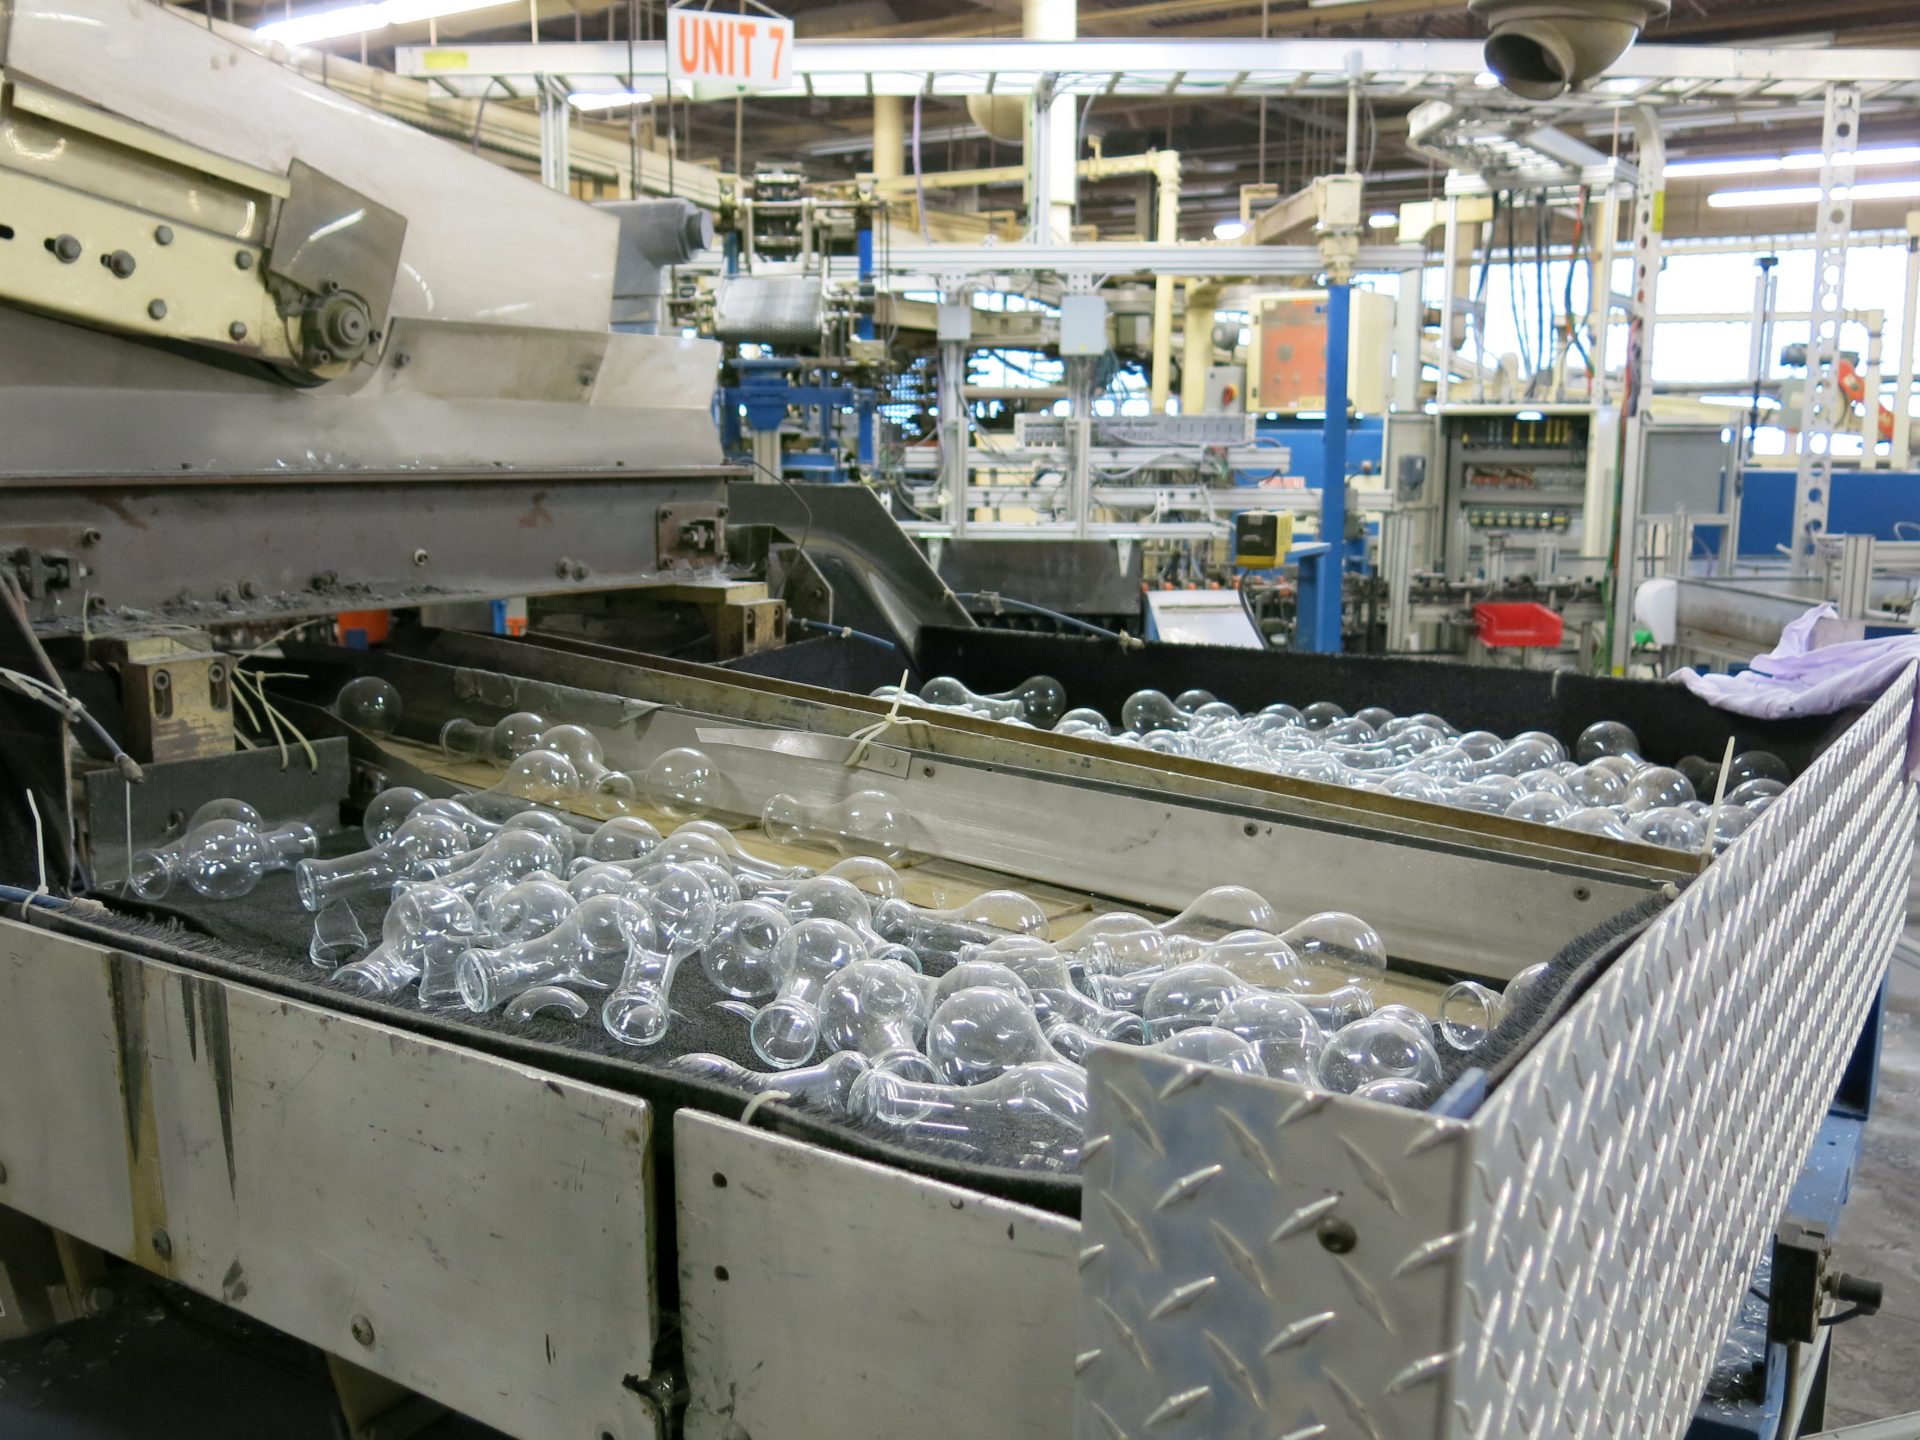 Parts of glass lightbulbs remain in the production lines. About 175 workers were affected when the plant shut down.